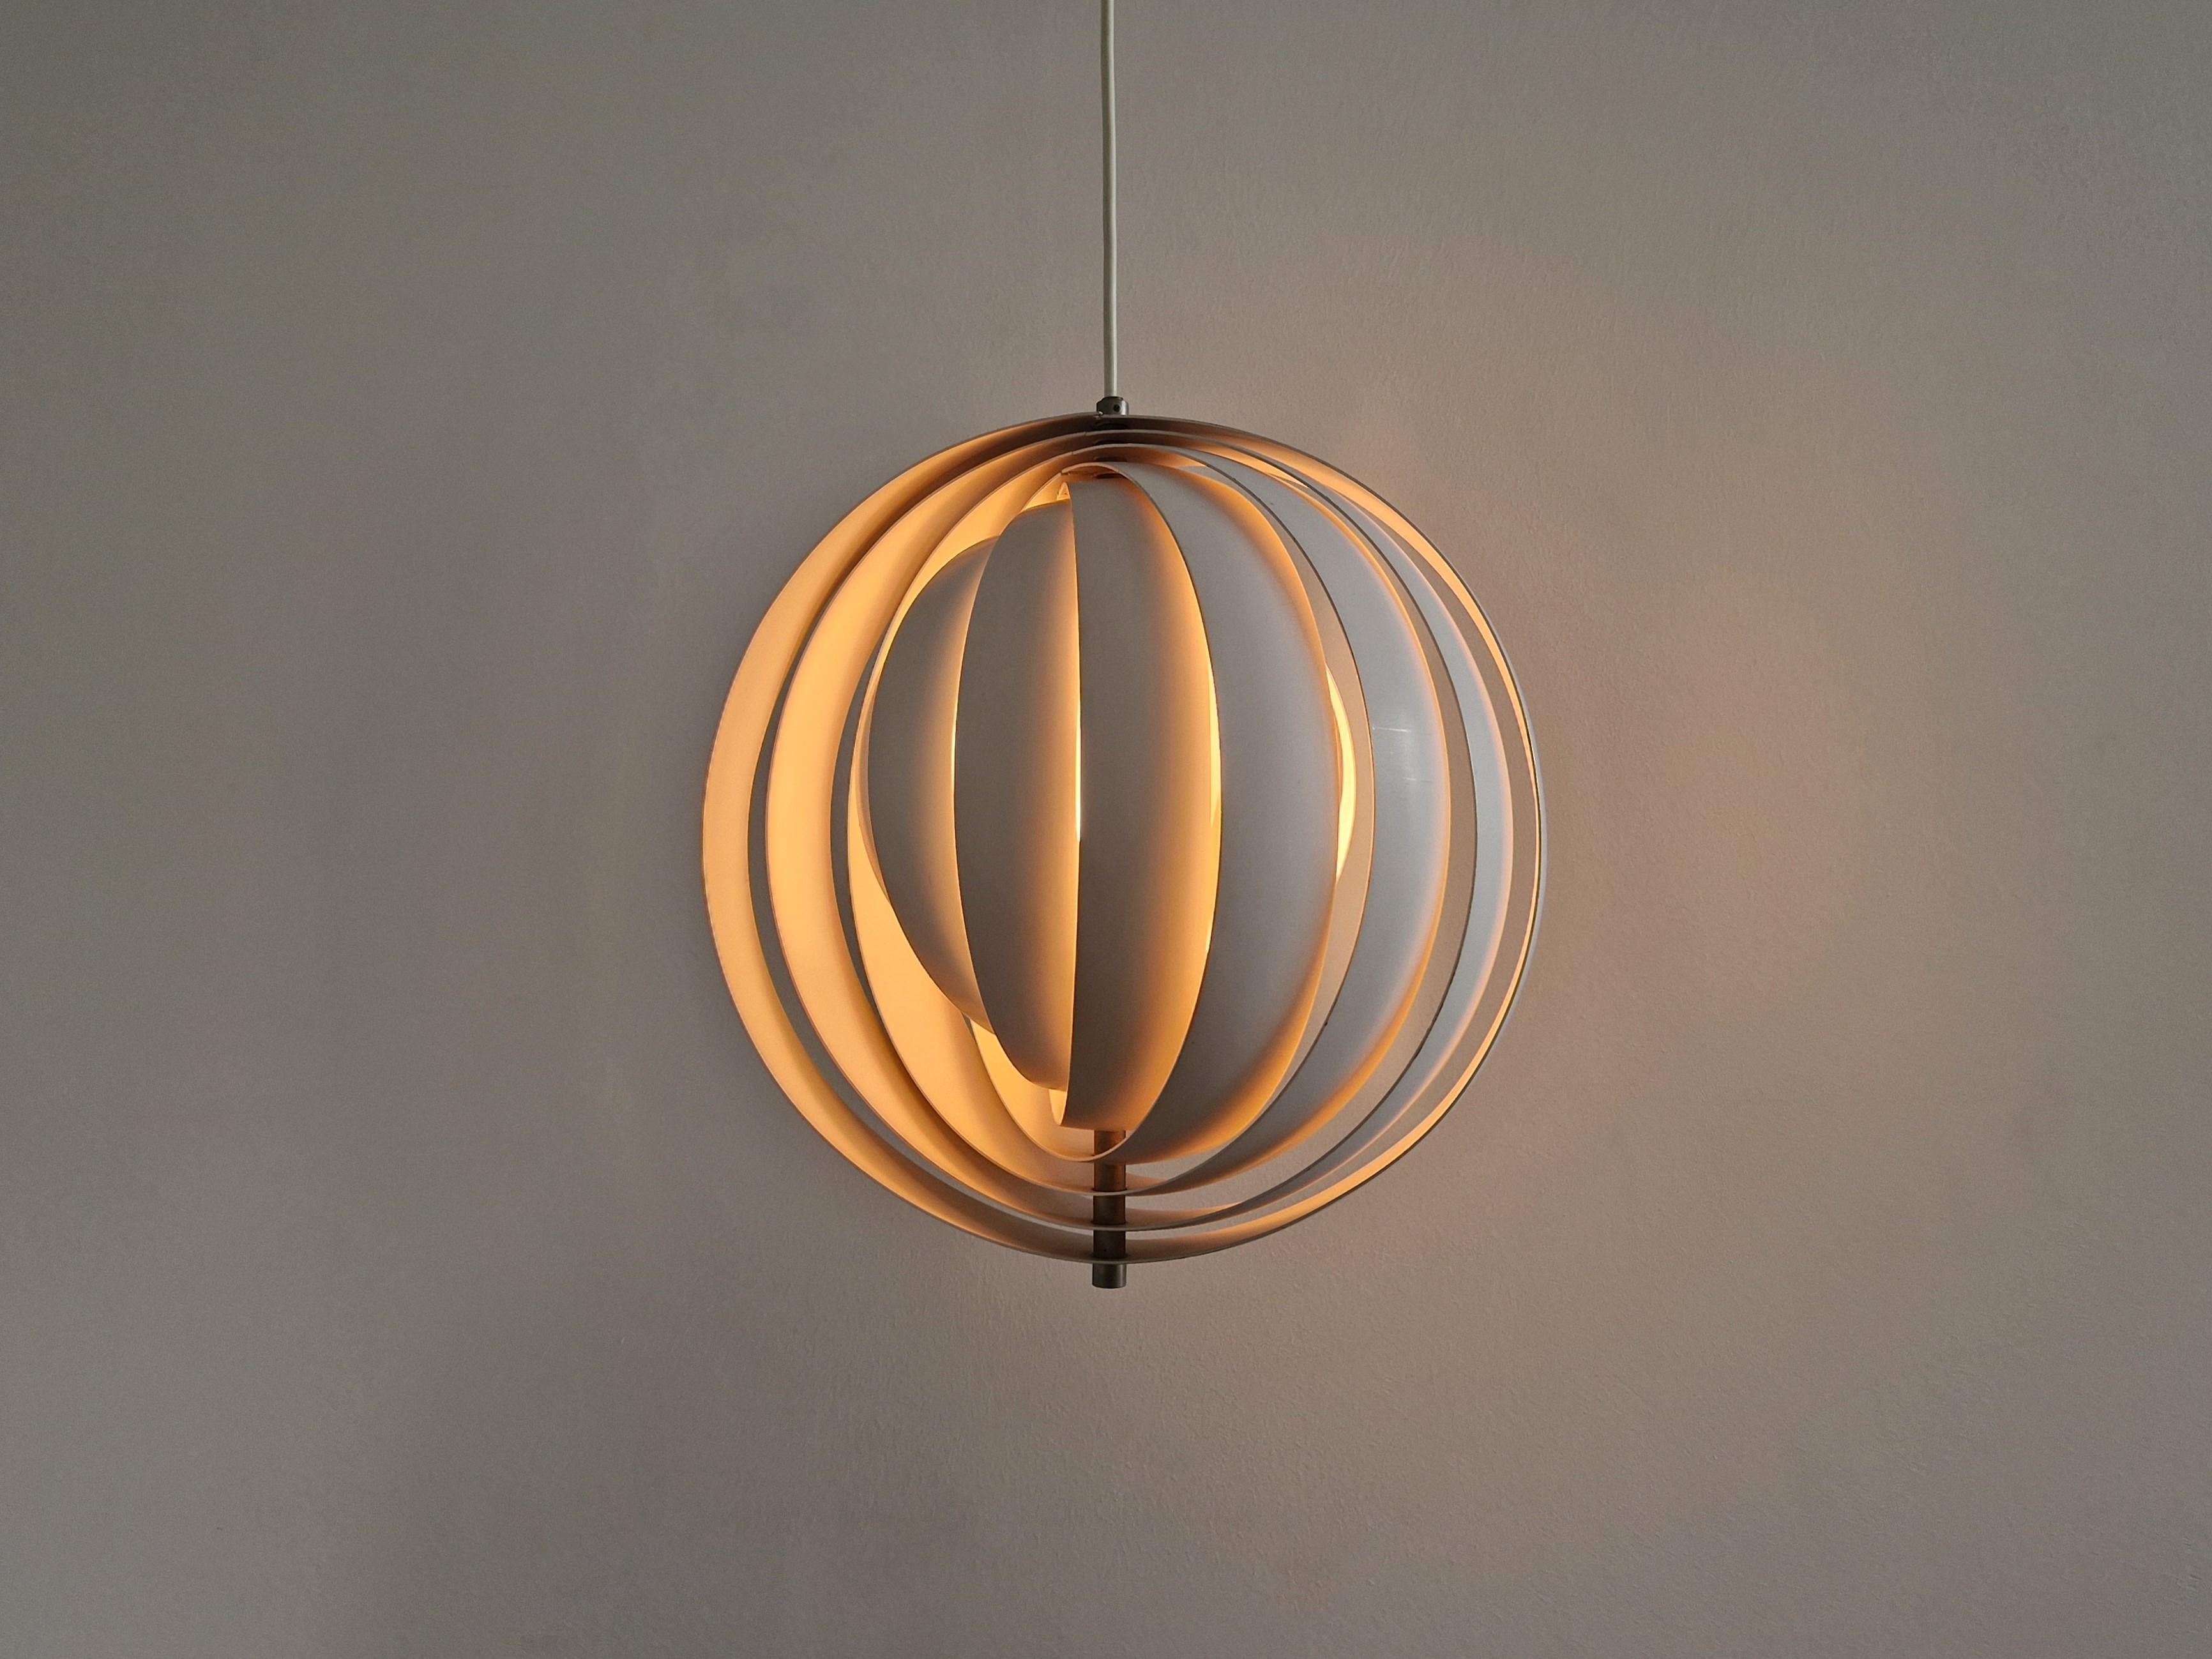 Mid-20th Century 'Moon Lamp' by Verner Panton for Louis Poulsen, Denmark 1960's For Sale